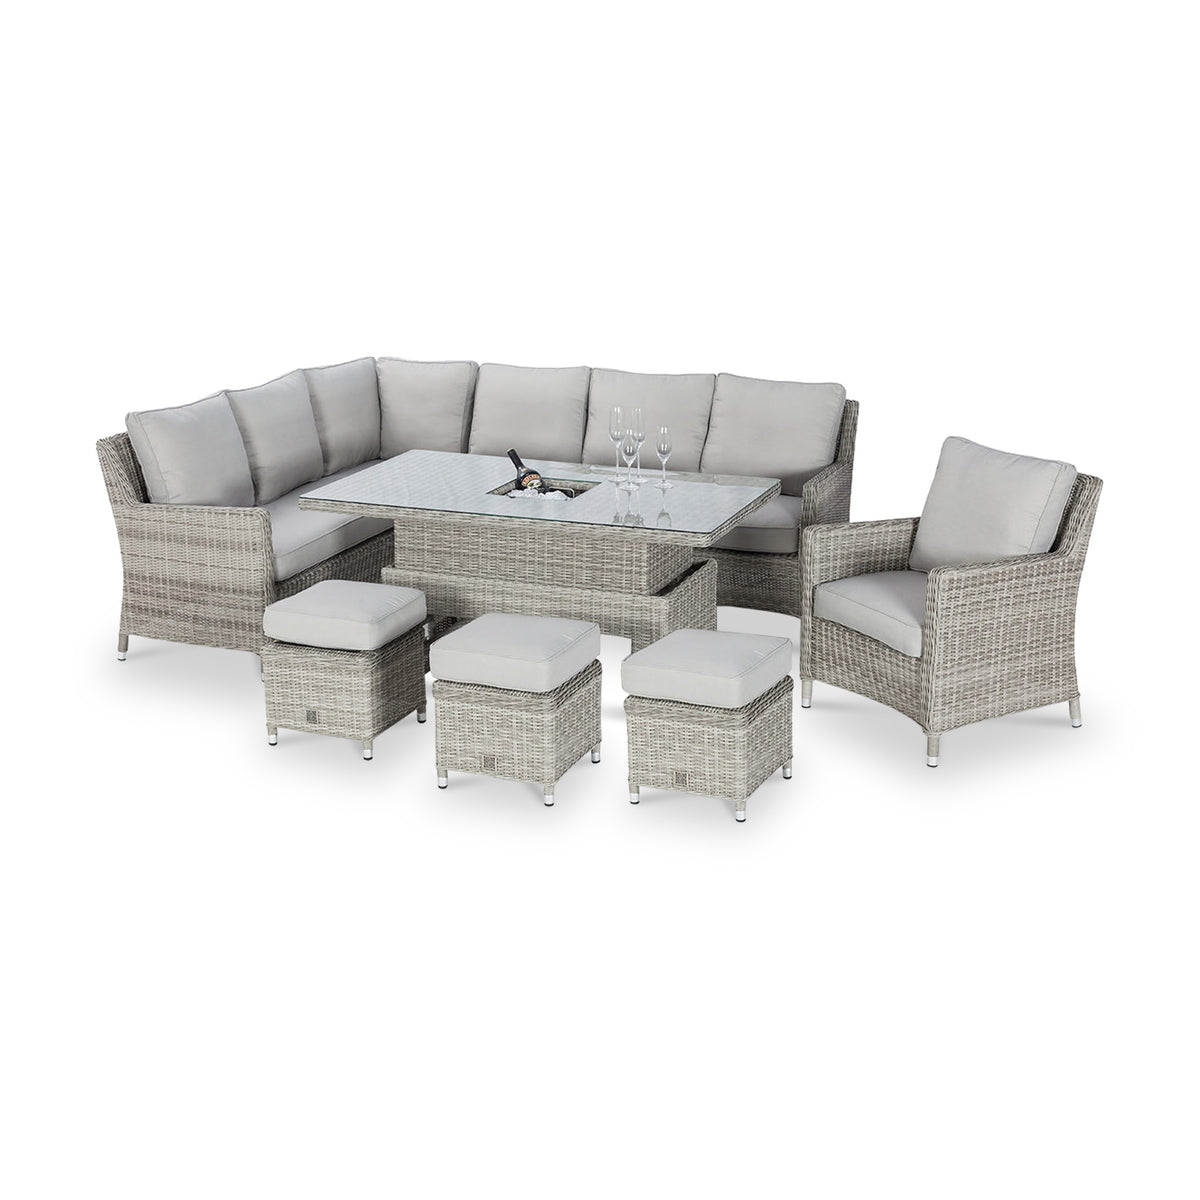 Maze Oxford Corner Rattan Dining Set with Rising Table from Roseland Furniture